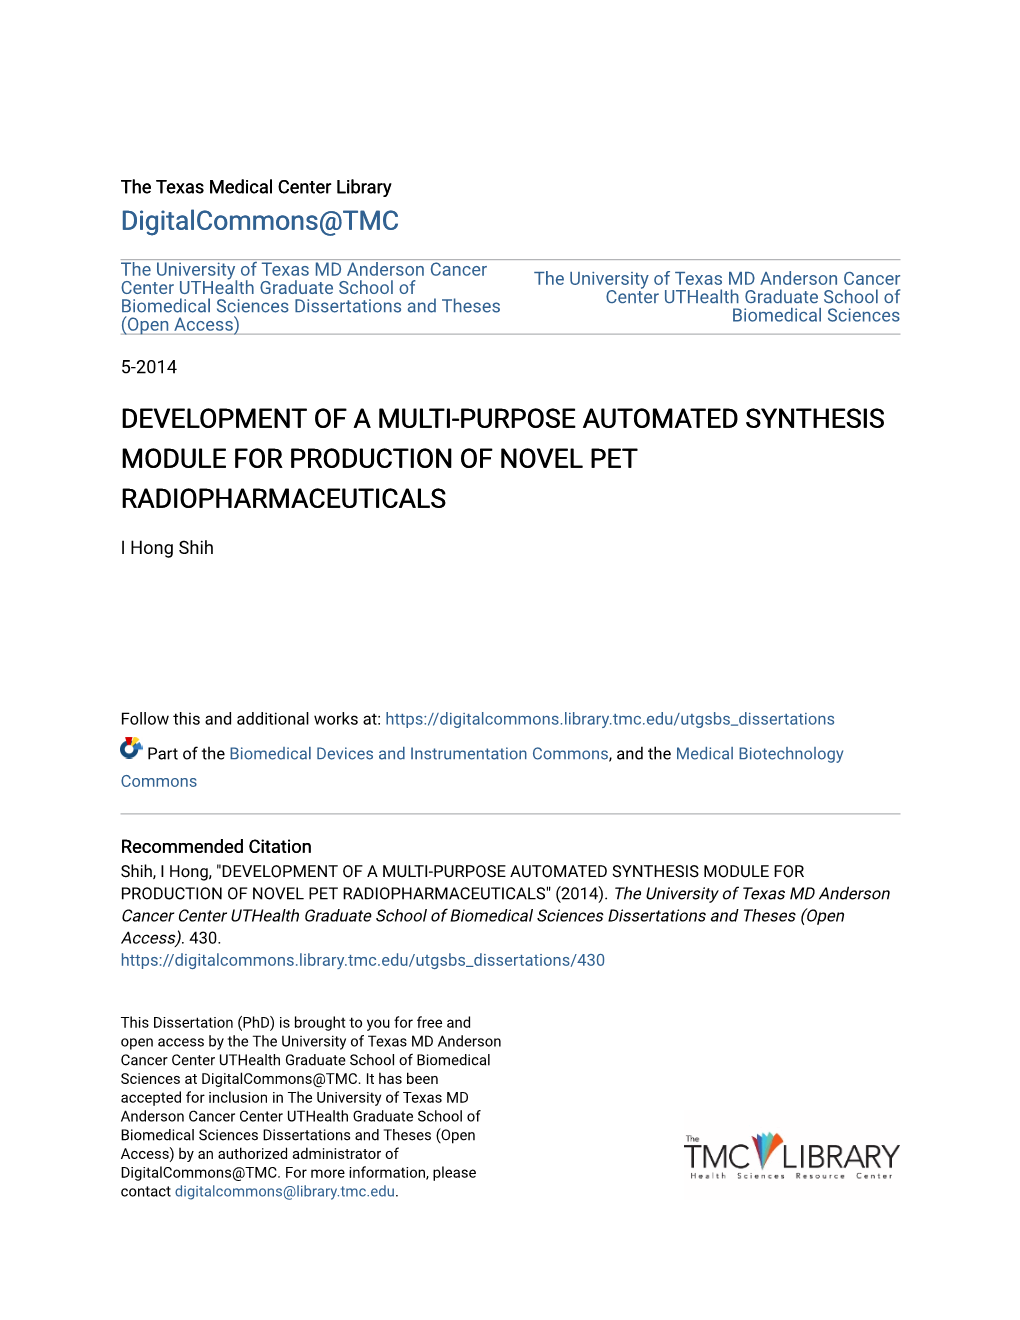 Development of a Multi-Purpose Automated Synthesis Module for Production of Novel Pet Radiopharmaceuticals